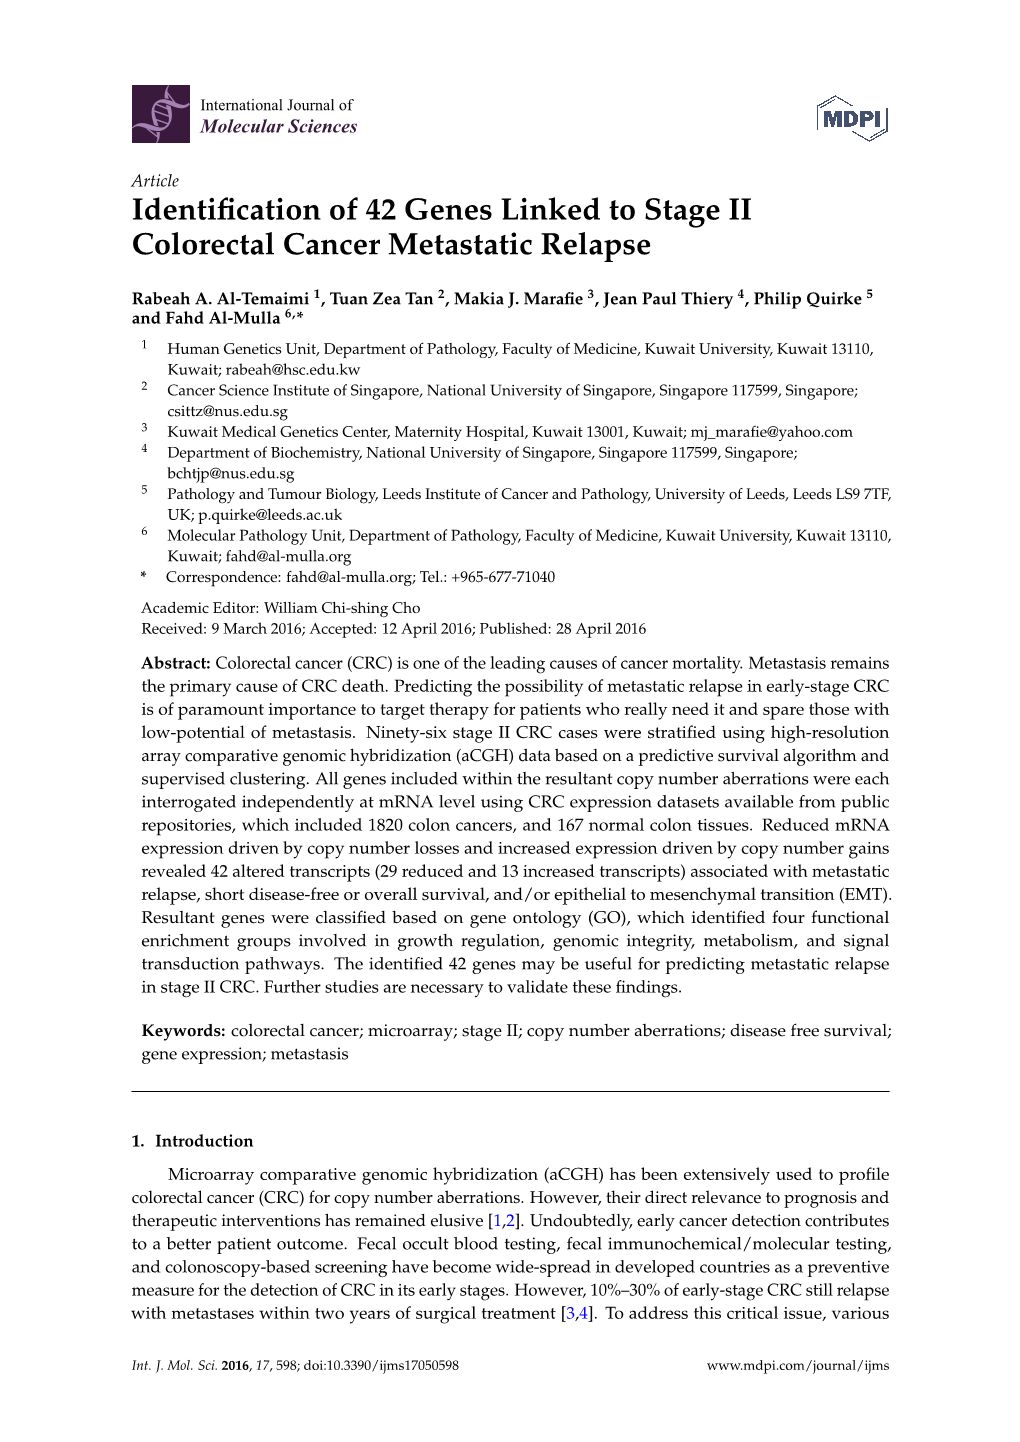 Identification of 42 Genes Linked to Stage II Colorectal Cancer Metastatic Relapse